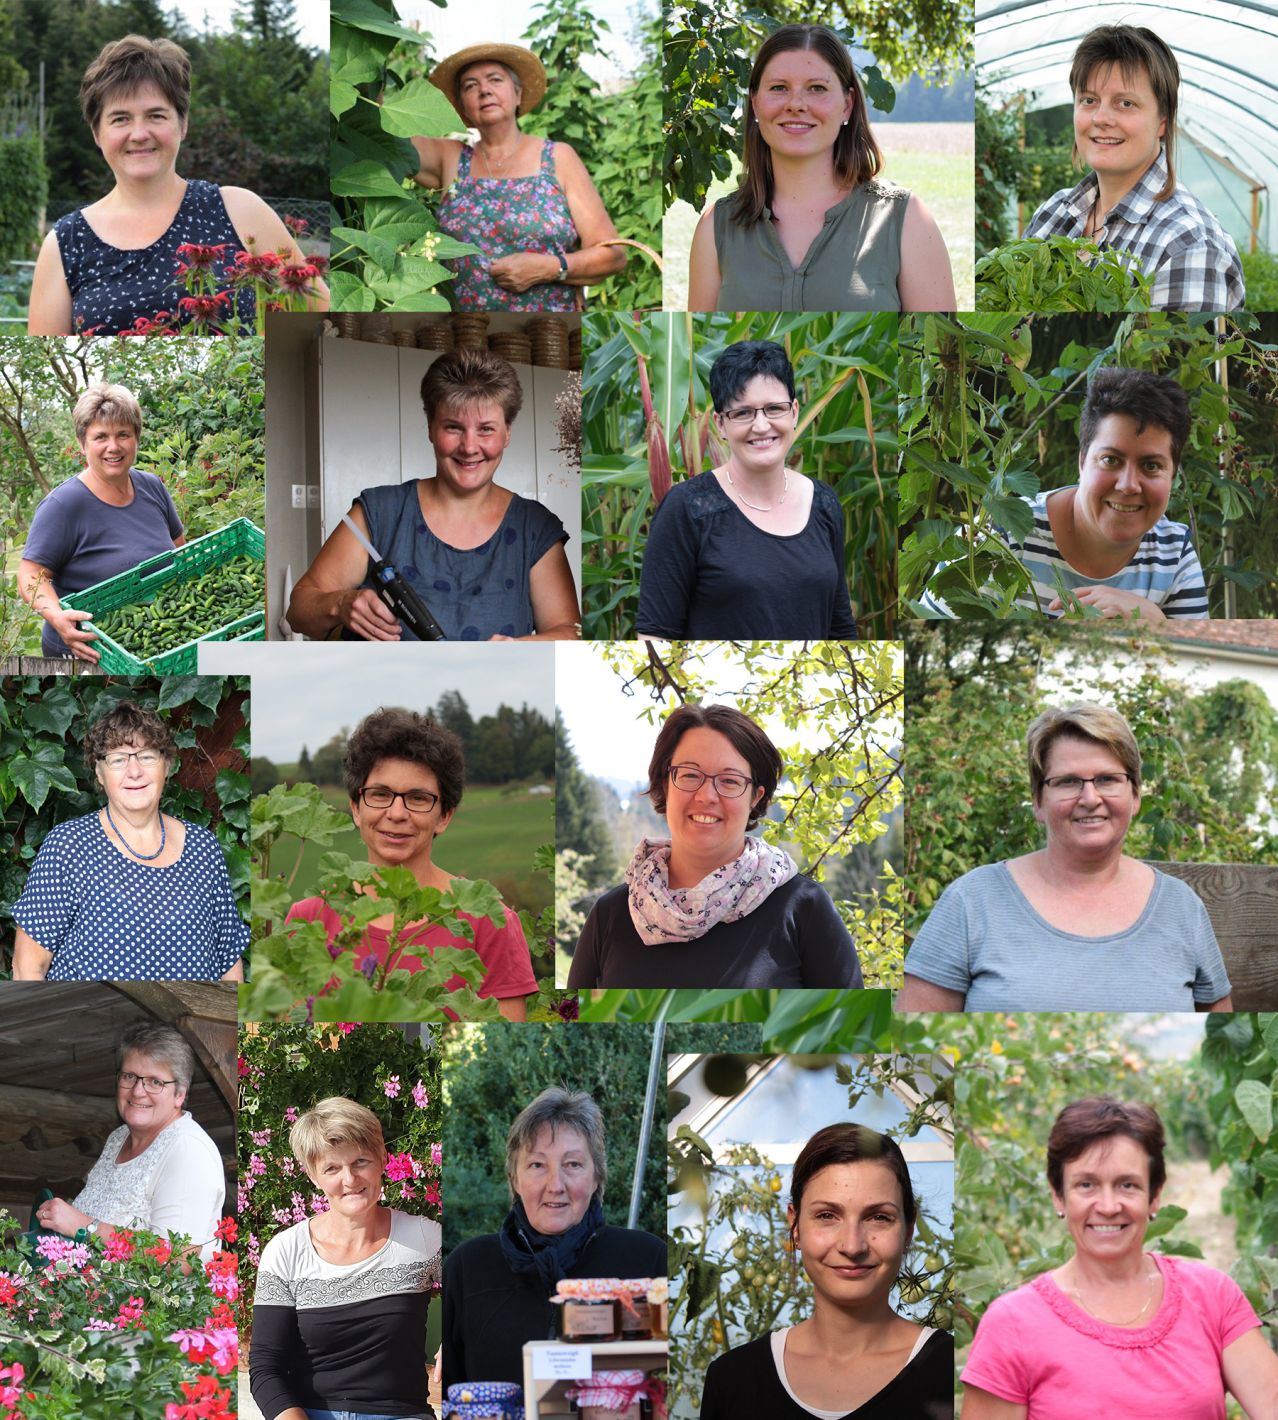 Compilation of portrait pictures of all farmers' wives from Bärner Burechorb